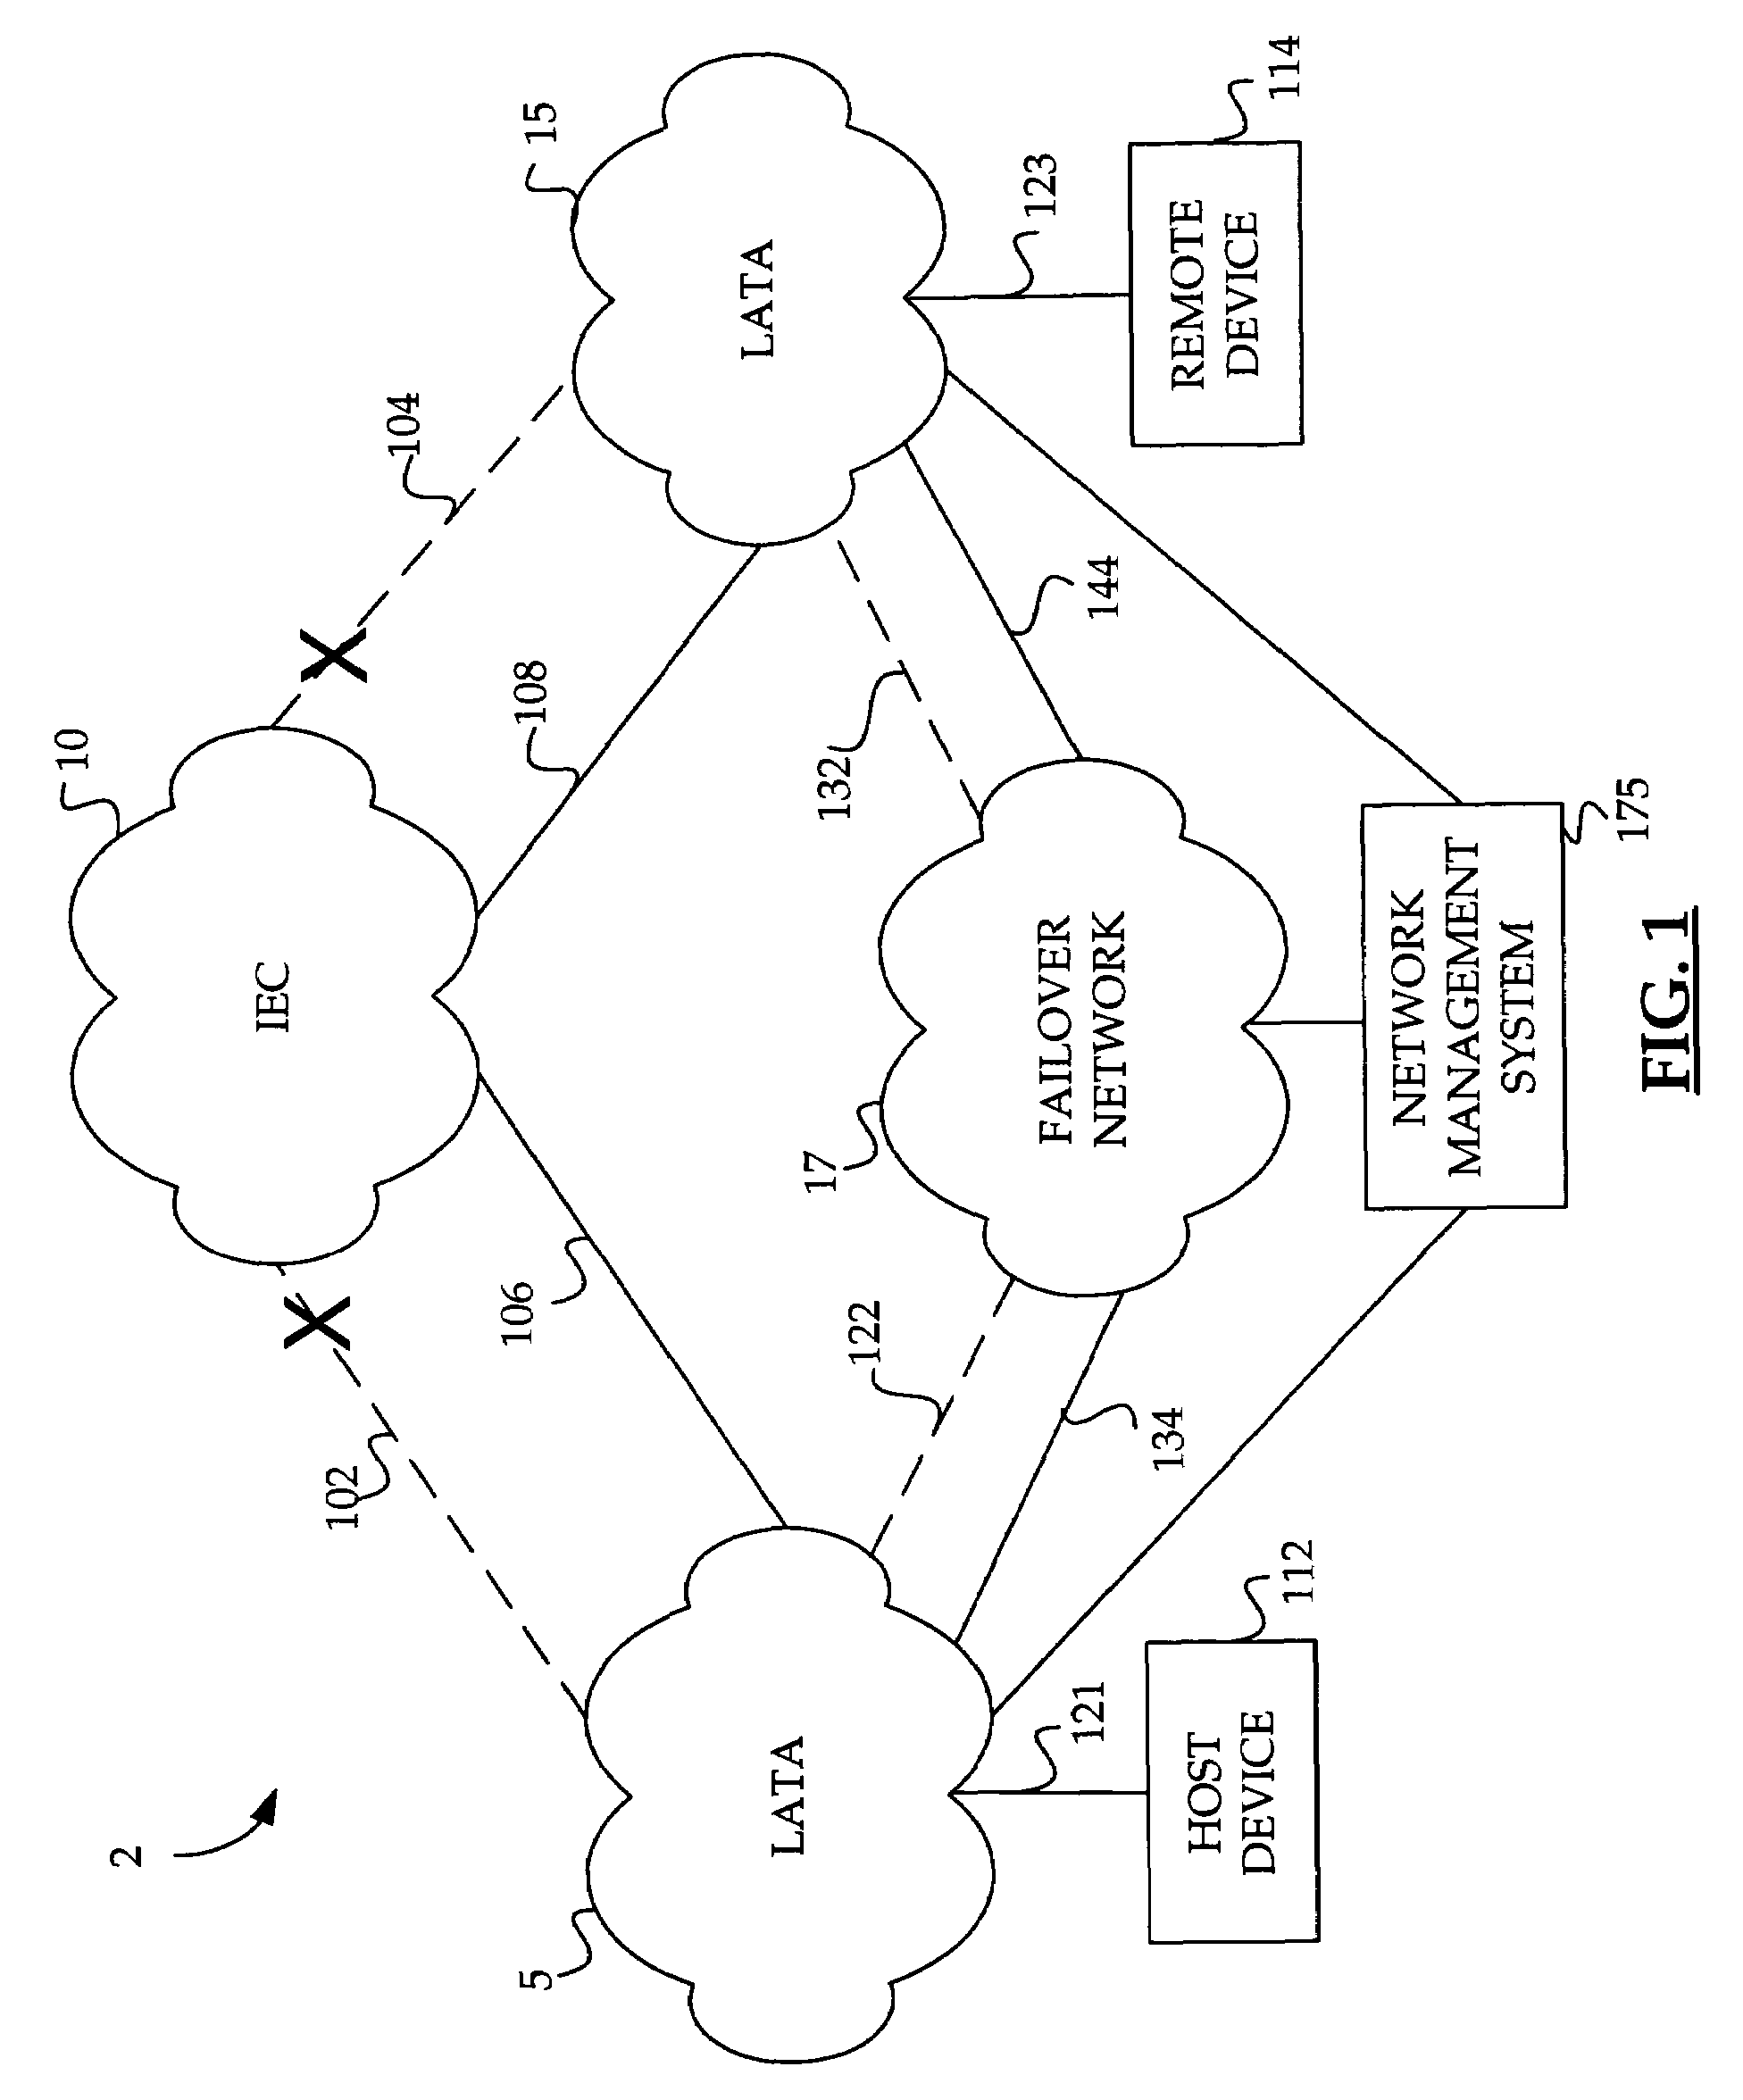 Method and system for providing a failover circuit for rerouting logical circuit data in a data network